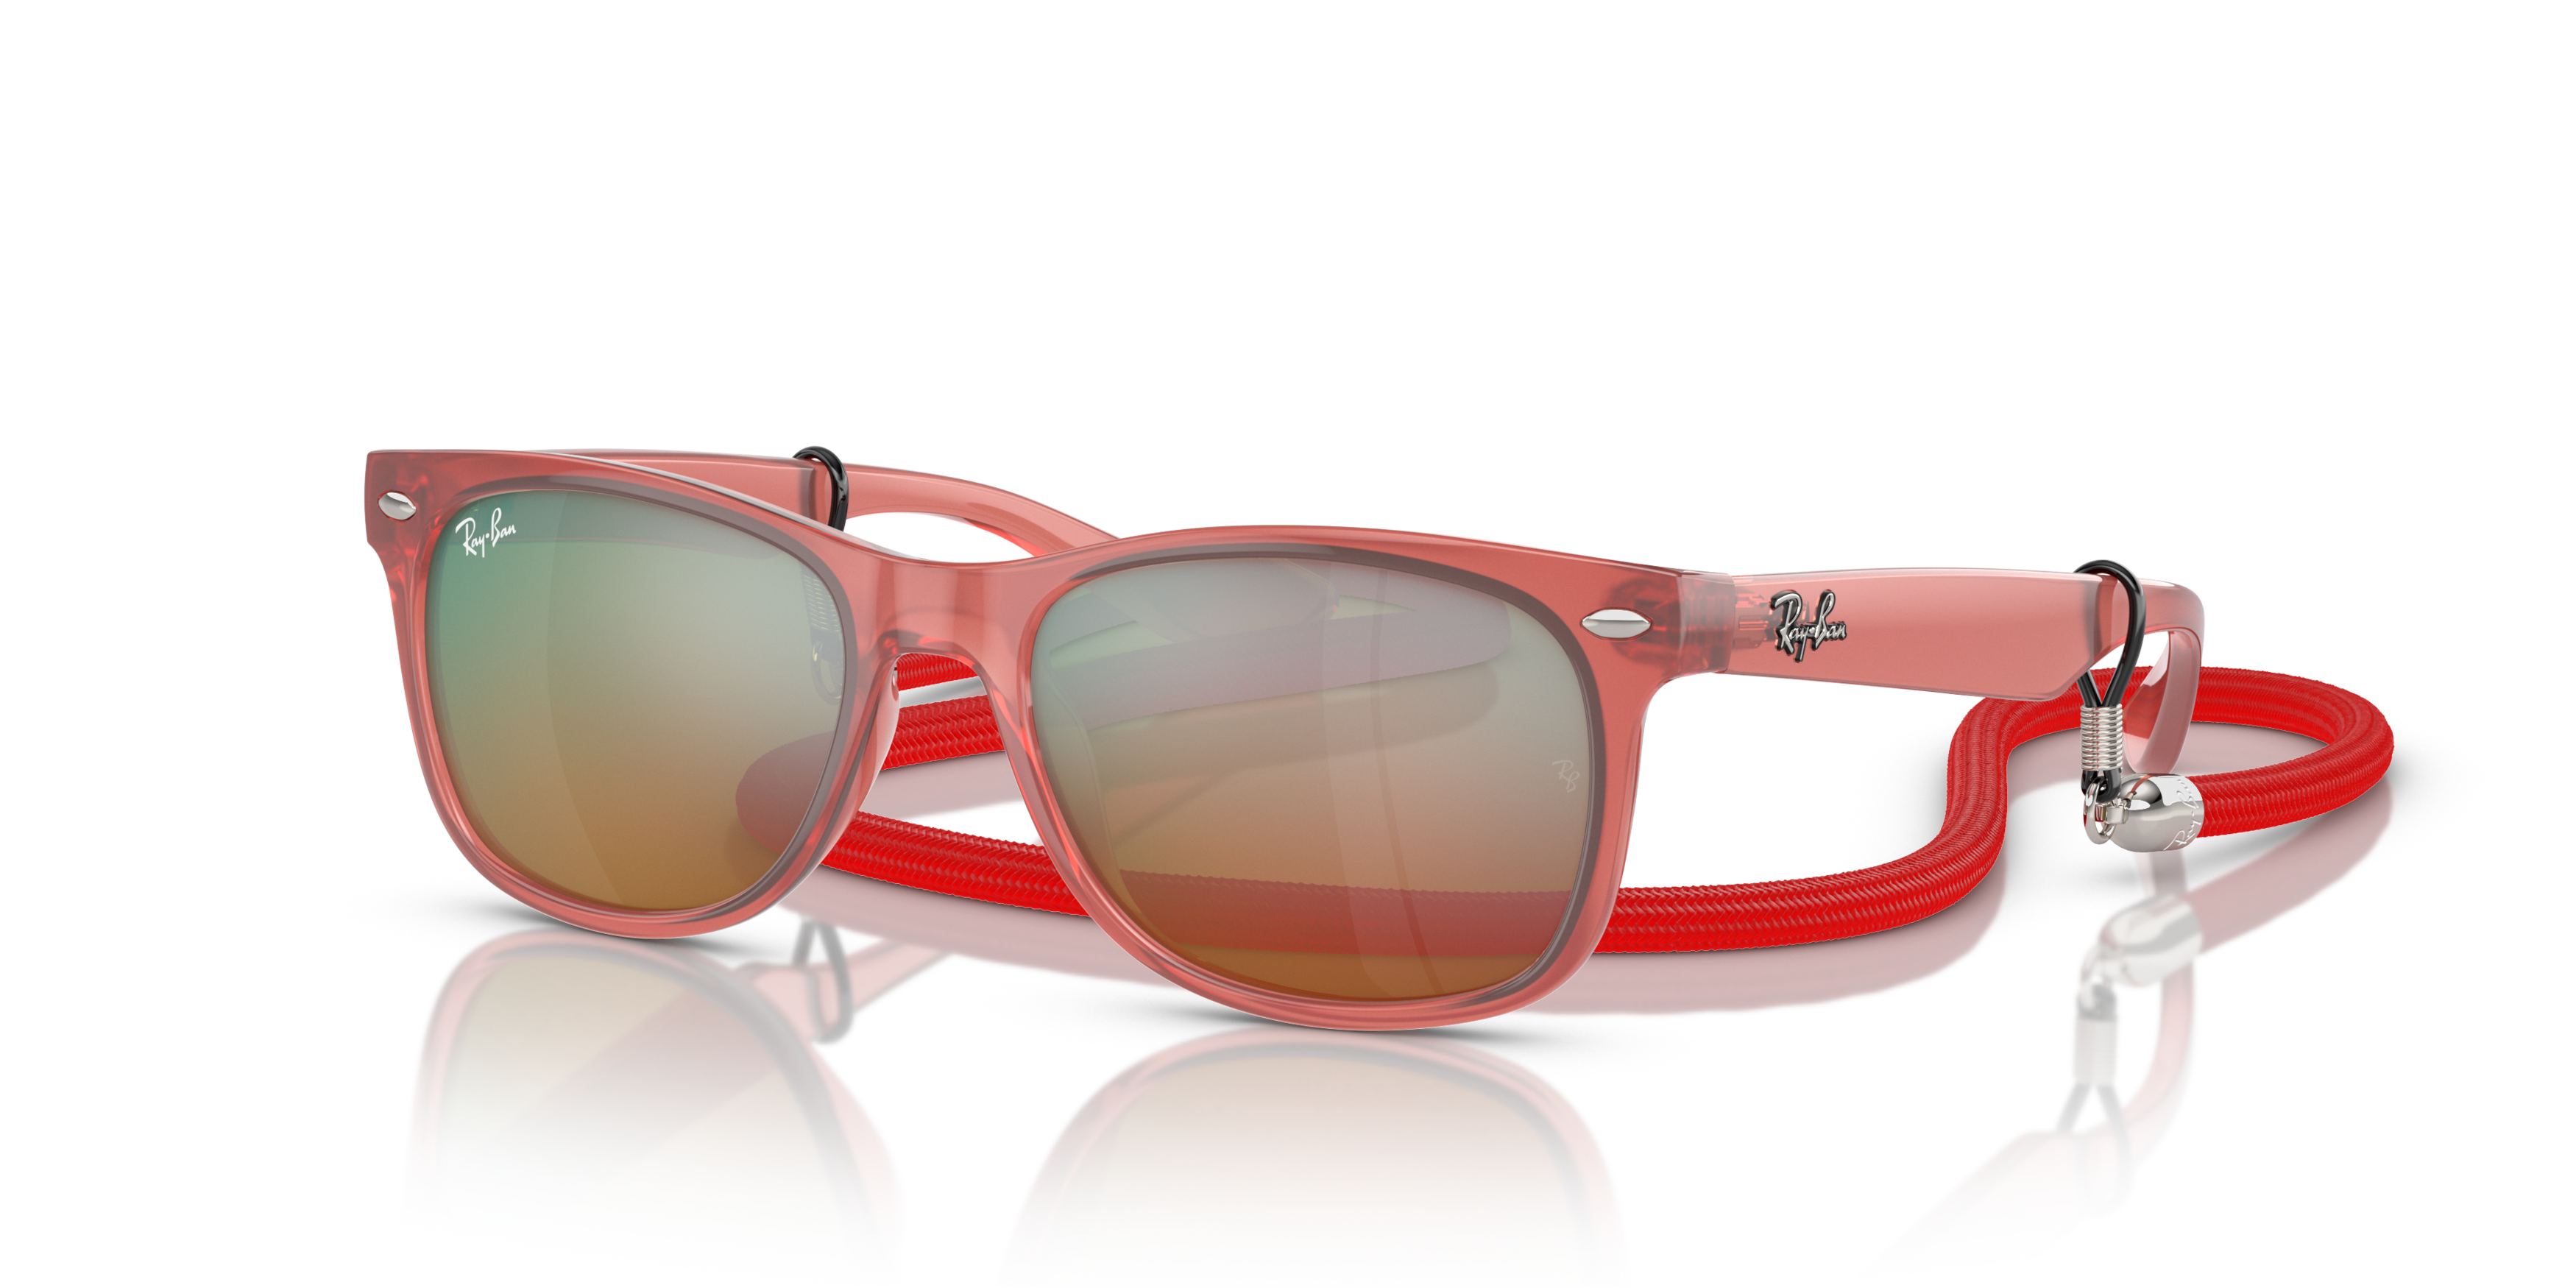 Angle_Left01 Ray-Ban RJ9052S Children's Sunglasses Silver / Transparent, Red